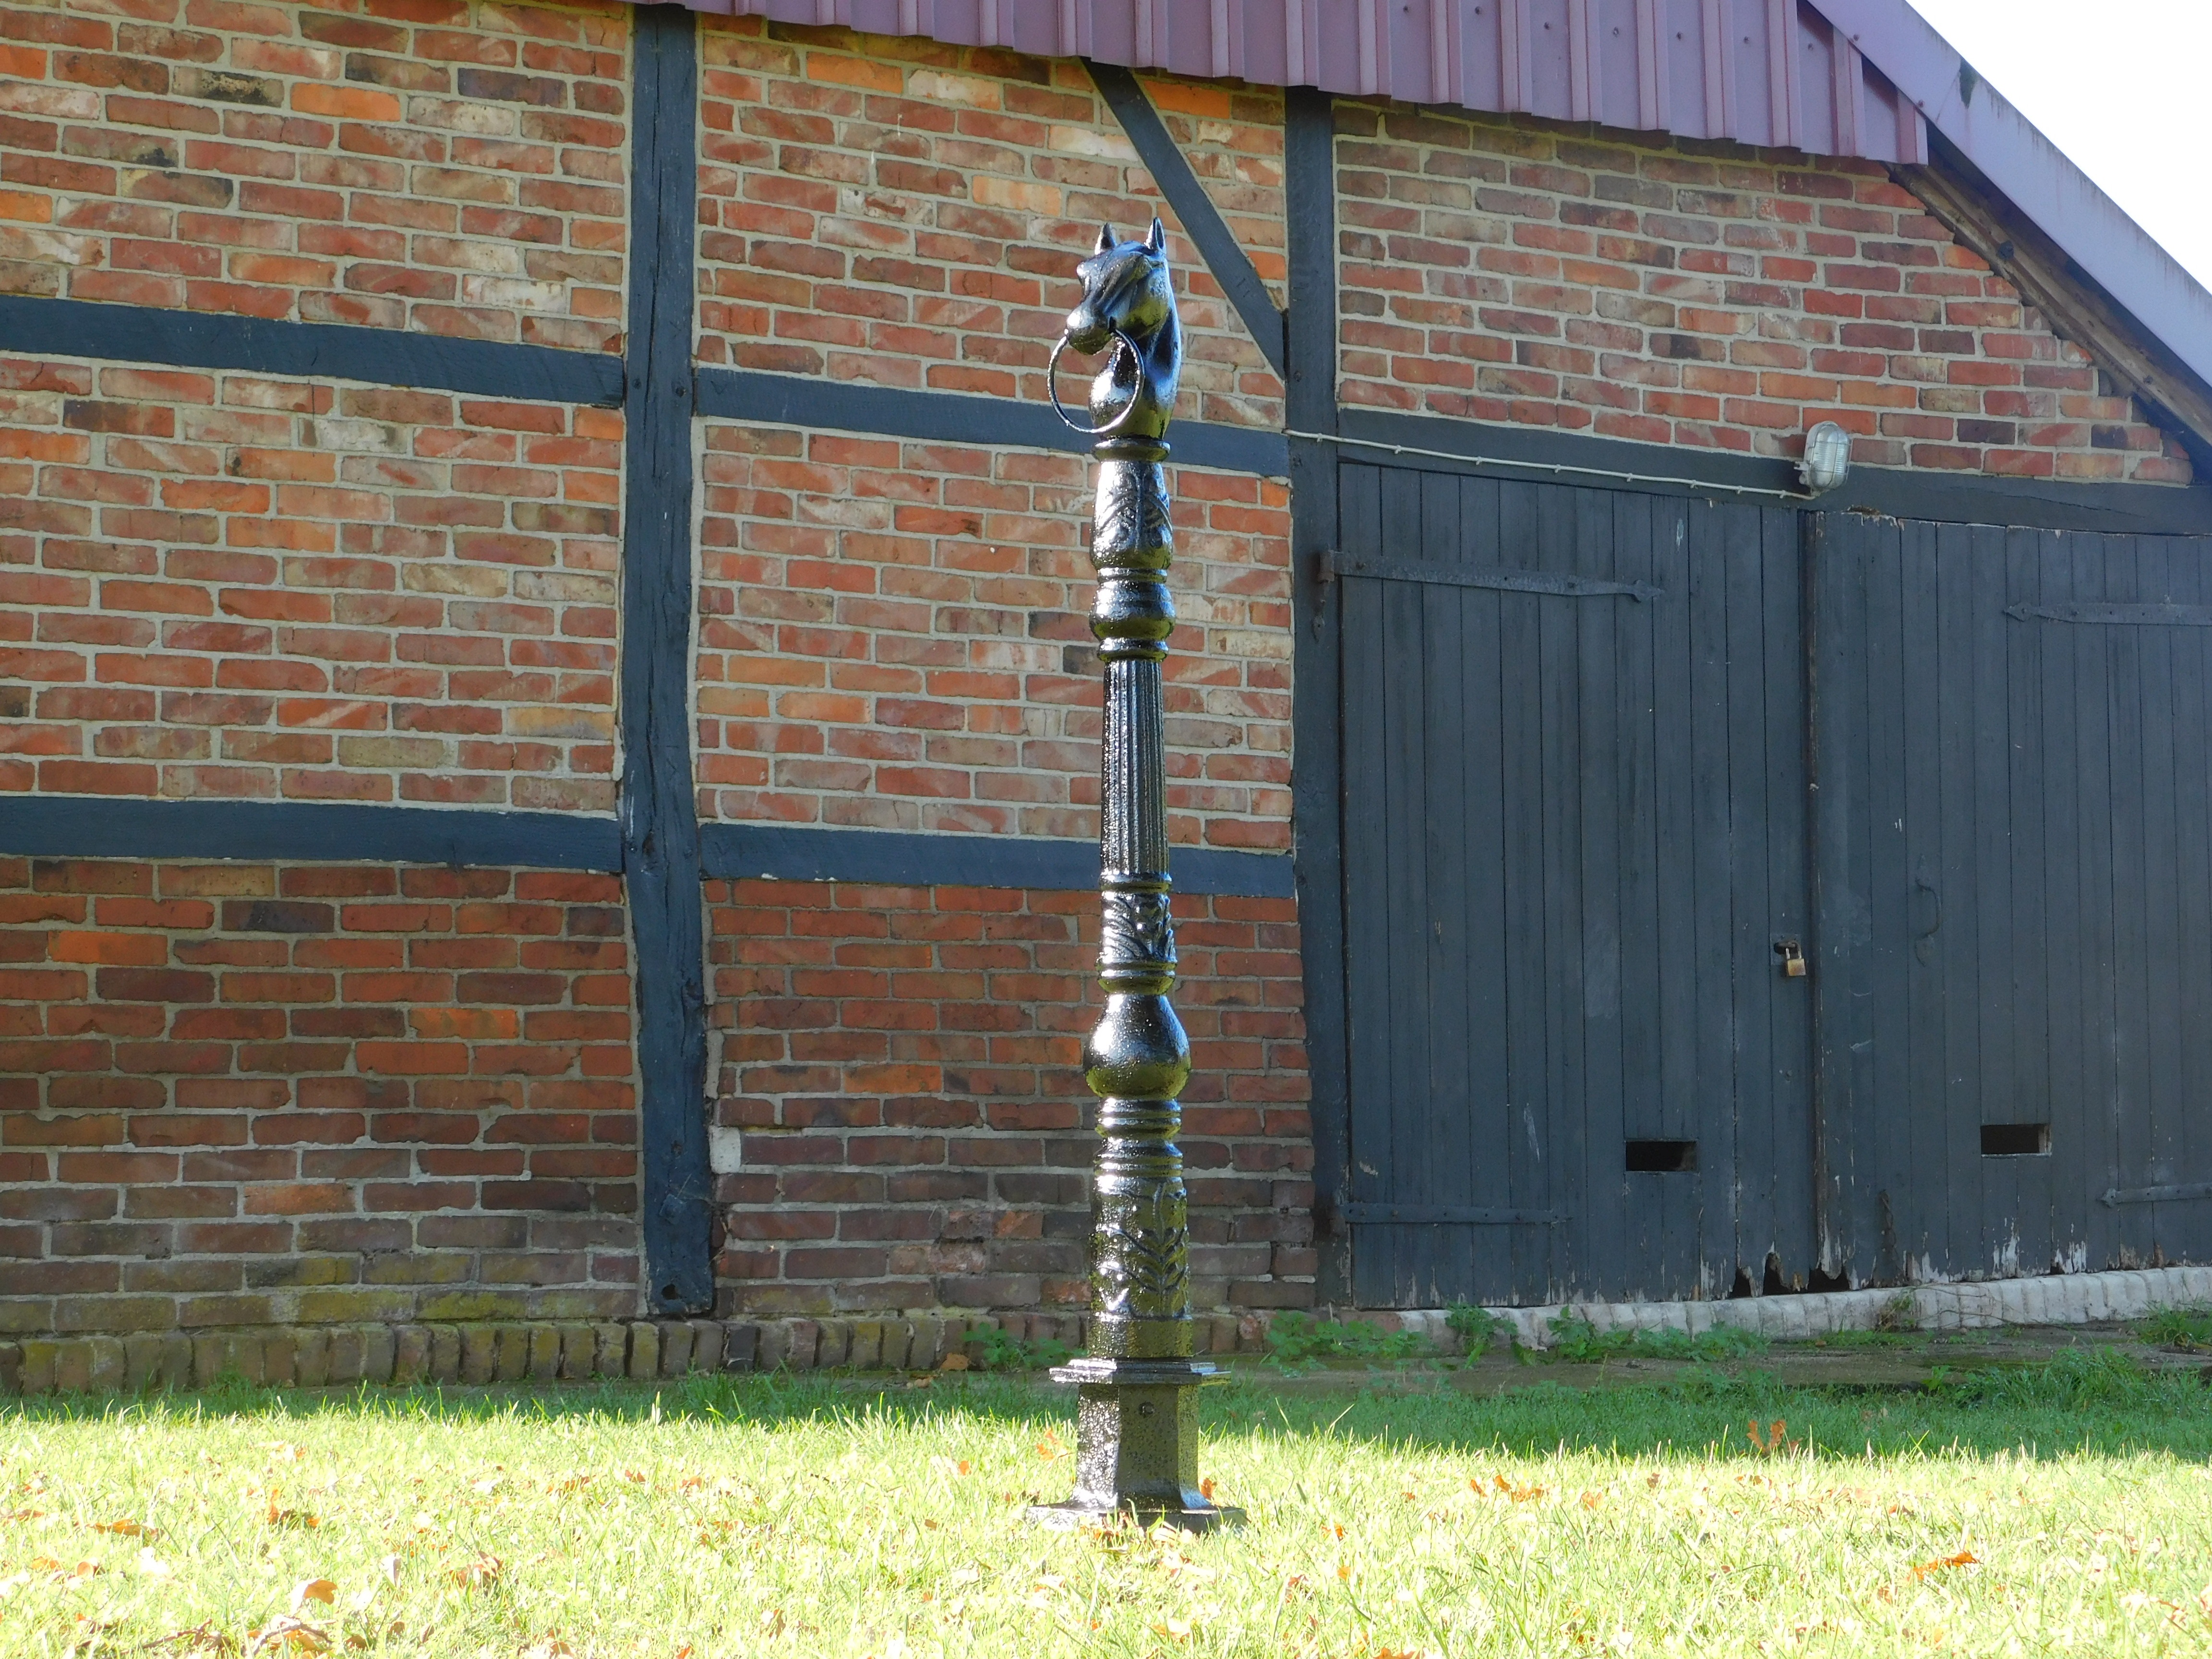 Stand post with horse head - black - cast iron